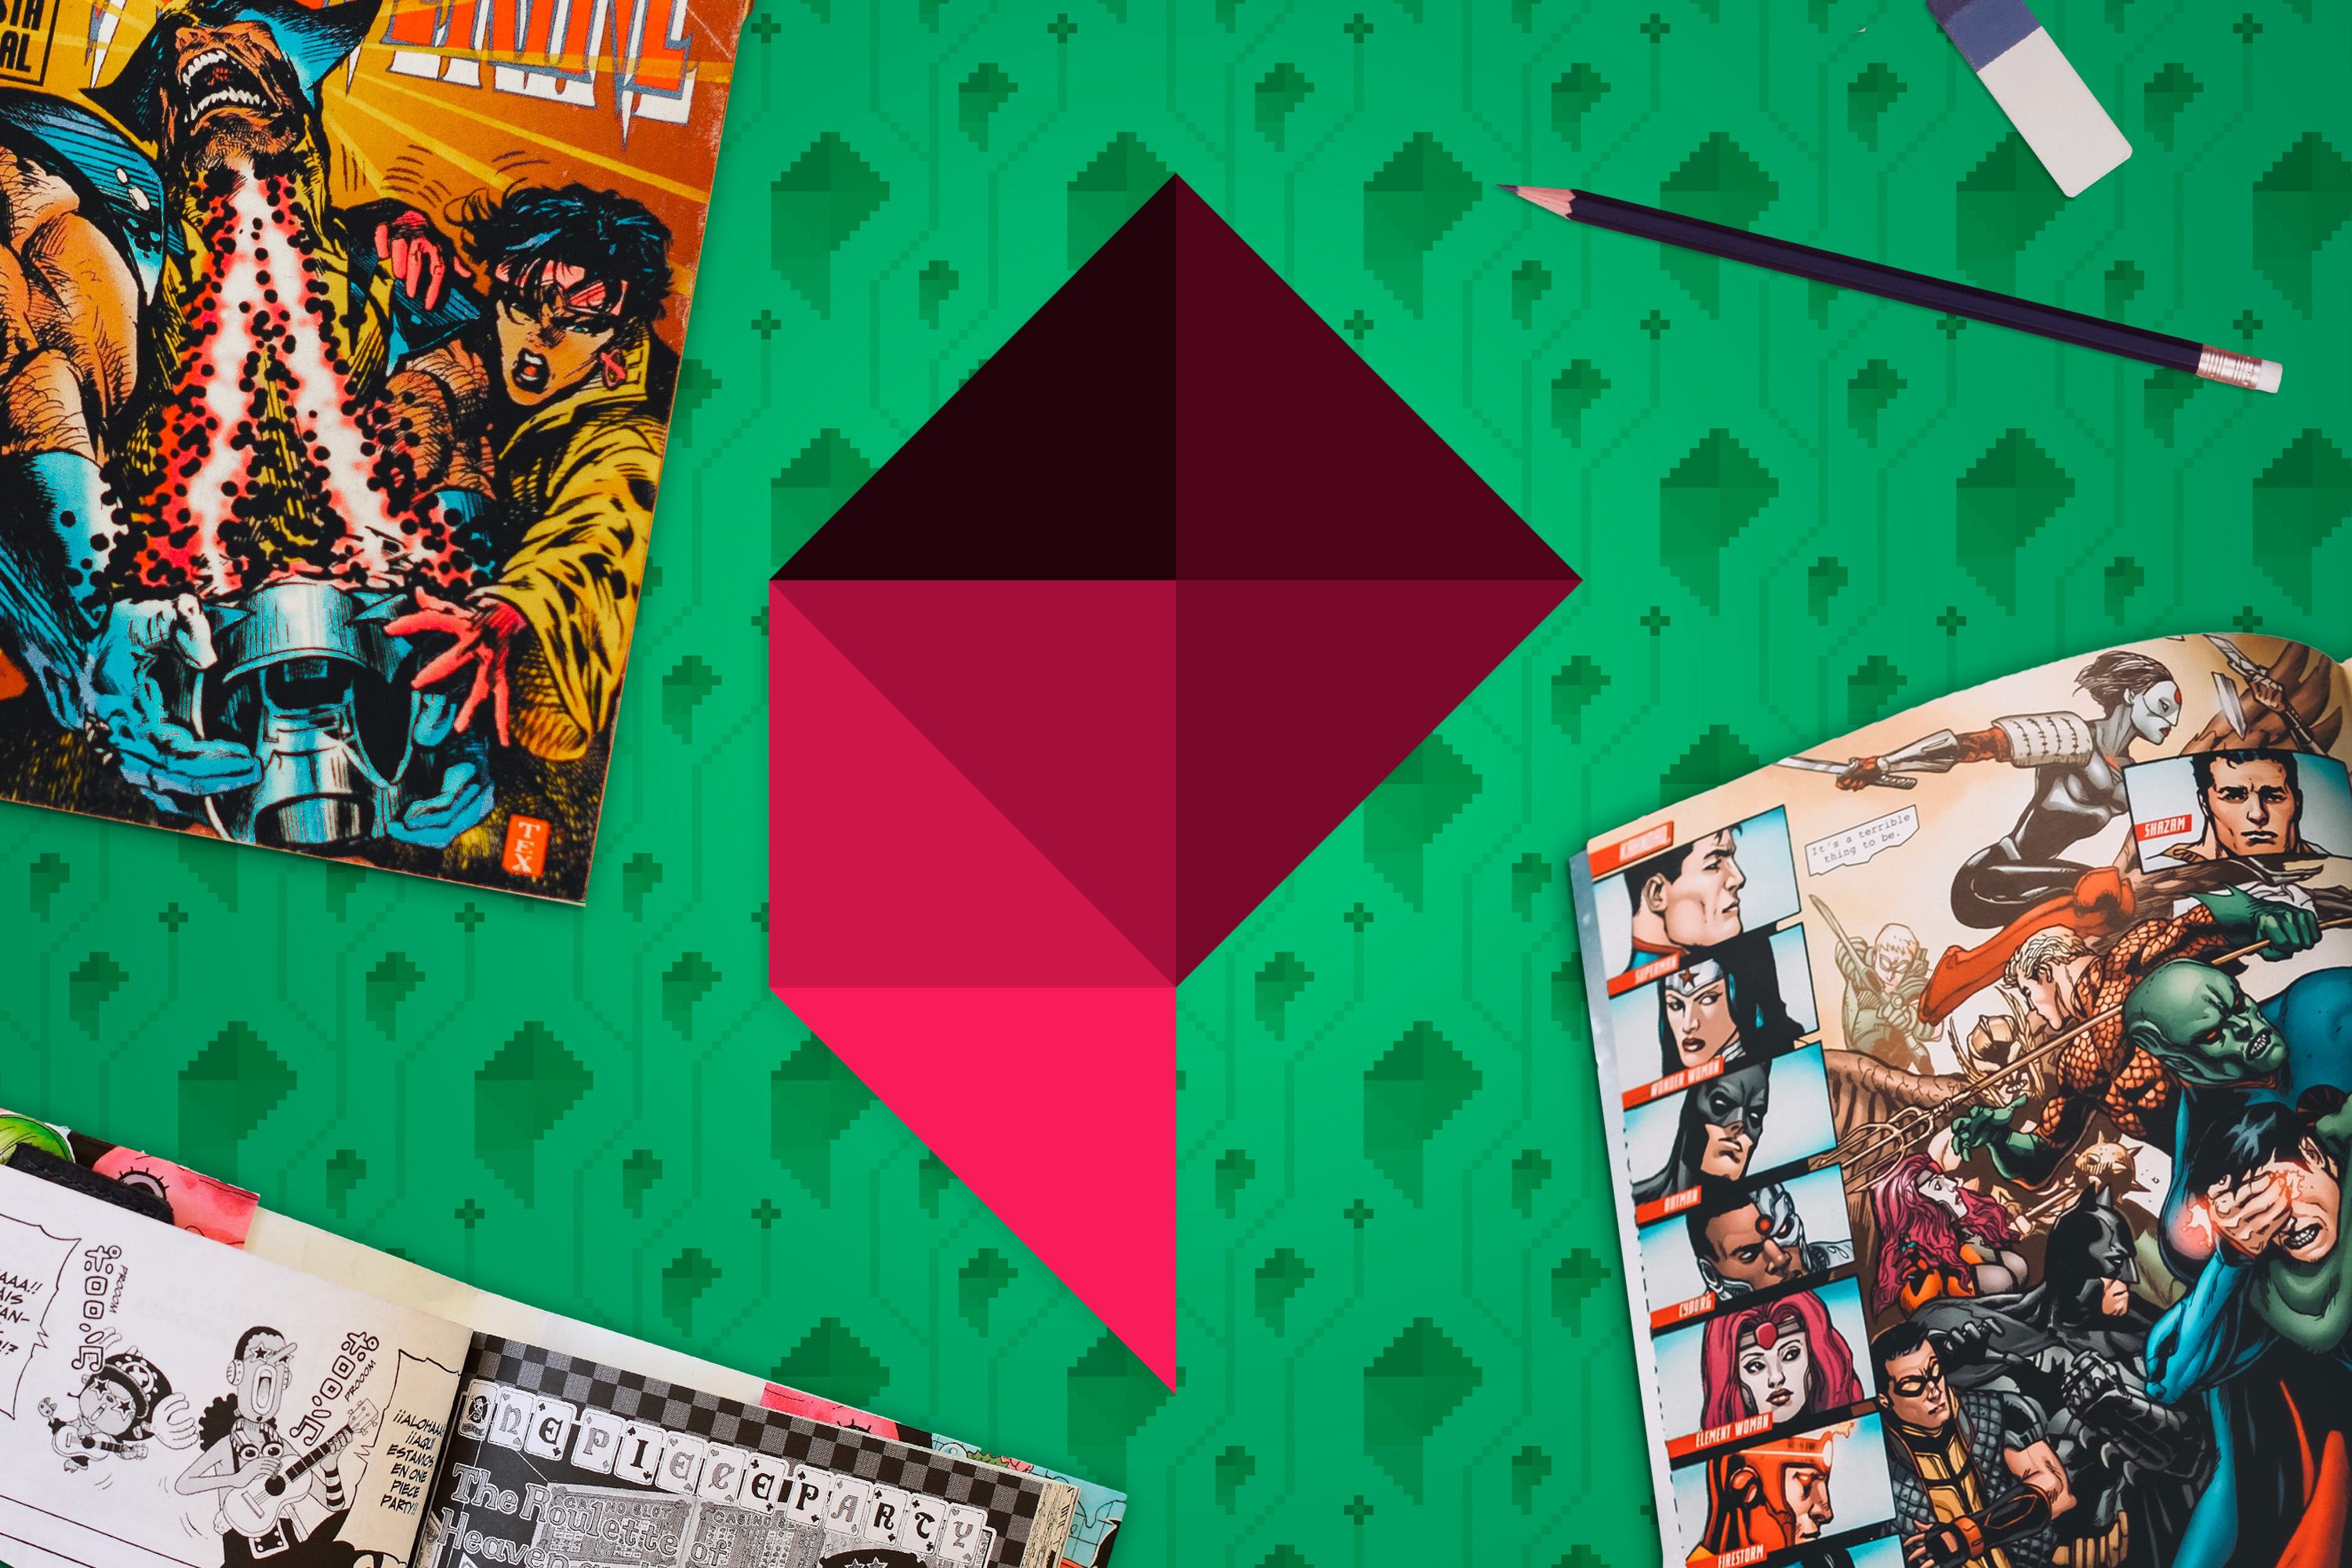 The Polygon logo against a green background, with comics and a pencil around it